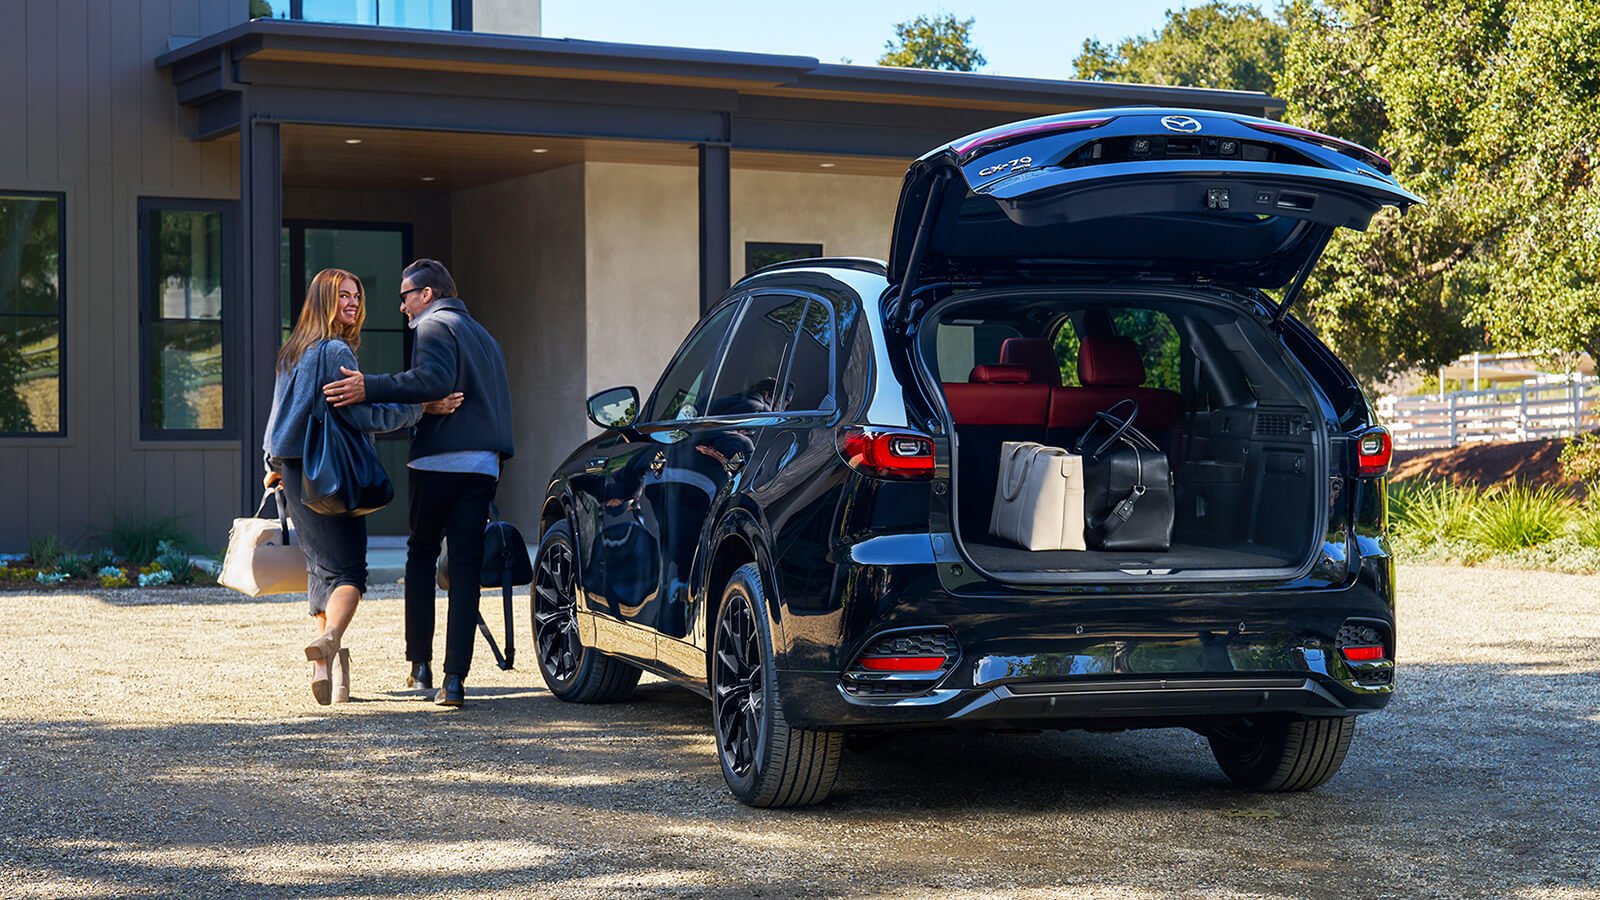 Parked CX-70 reflects the surrounding driveway at verdant modern home, view from the back with lift gate open revealing luggage as a smiling couple approaches the home.